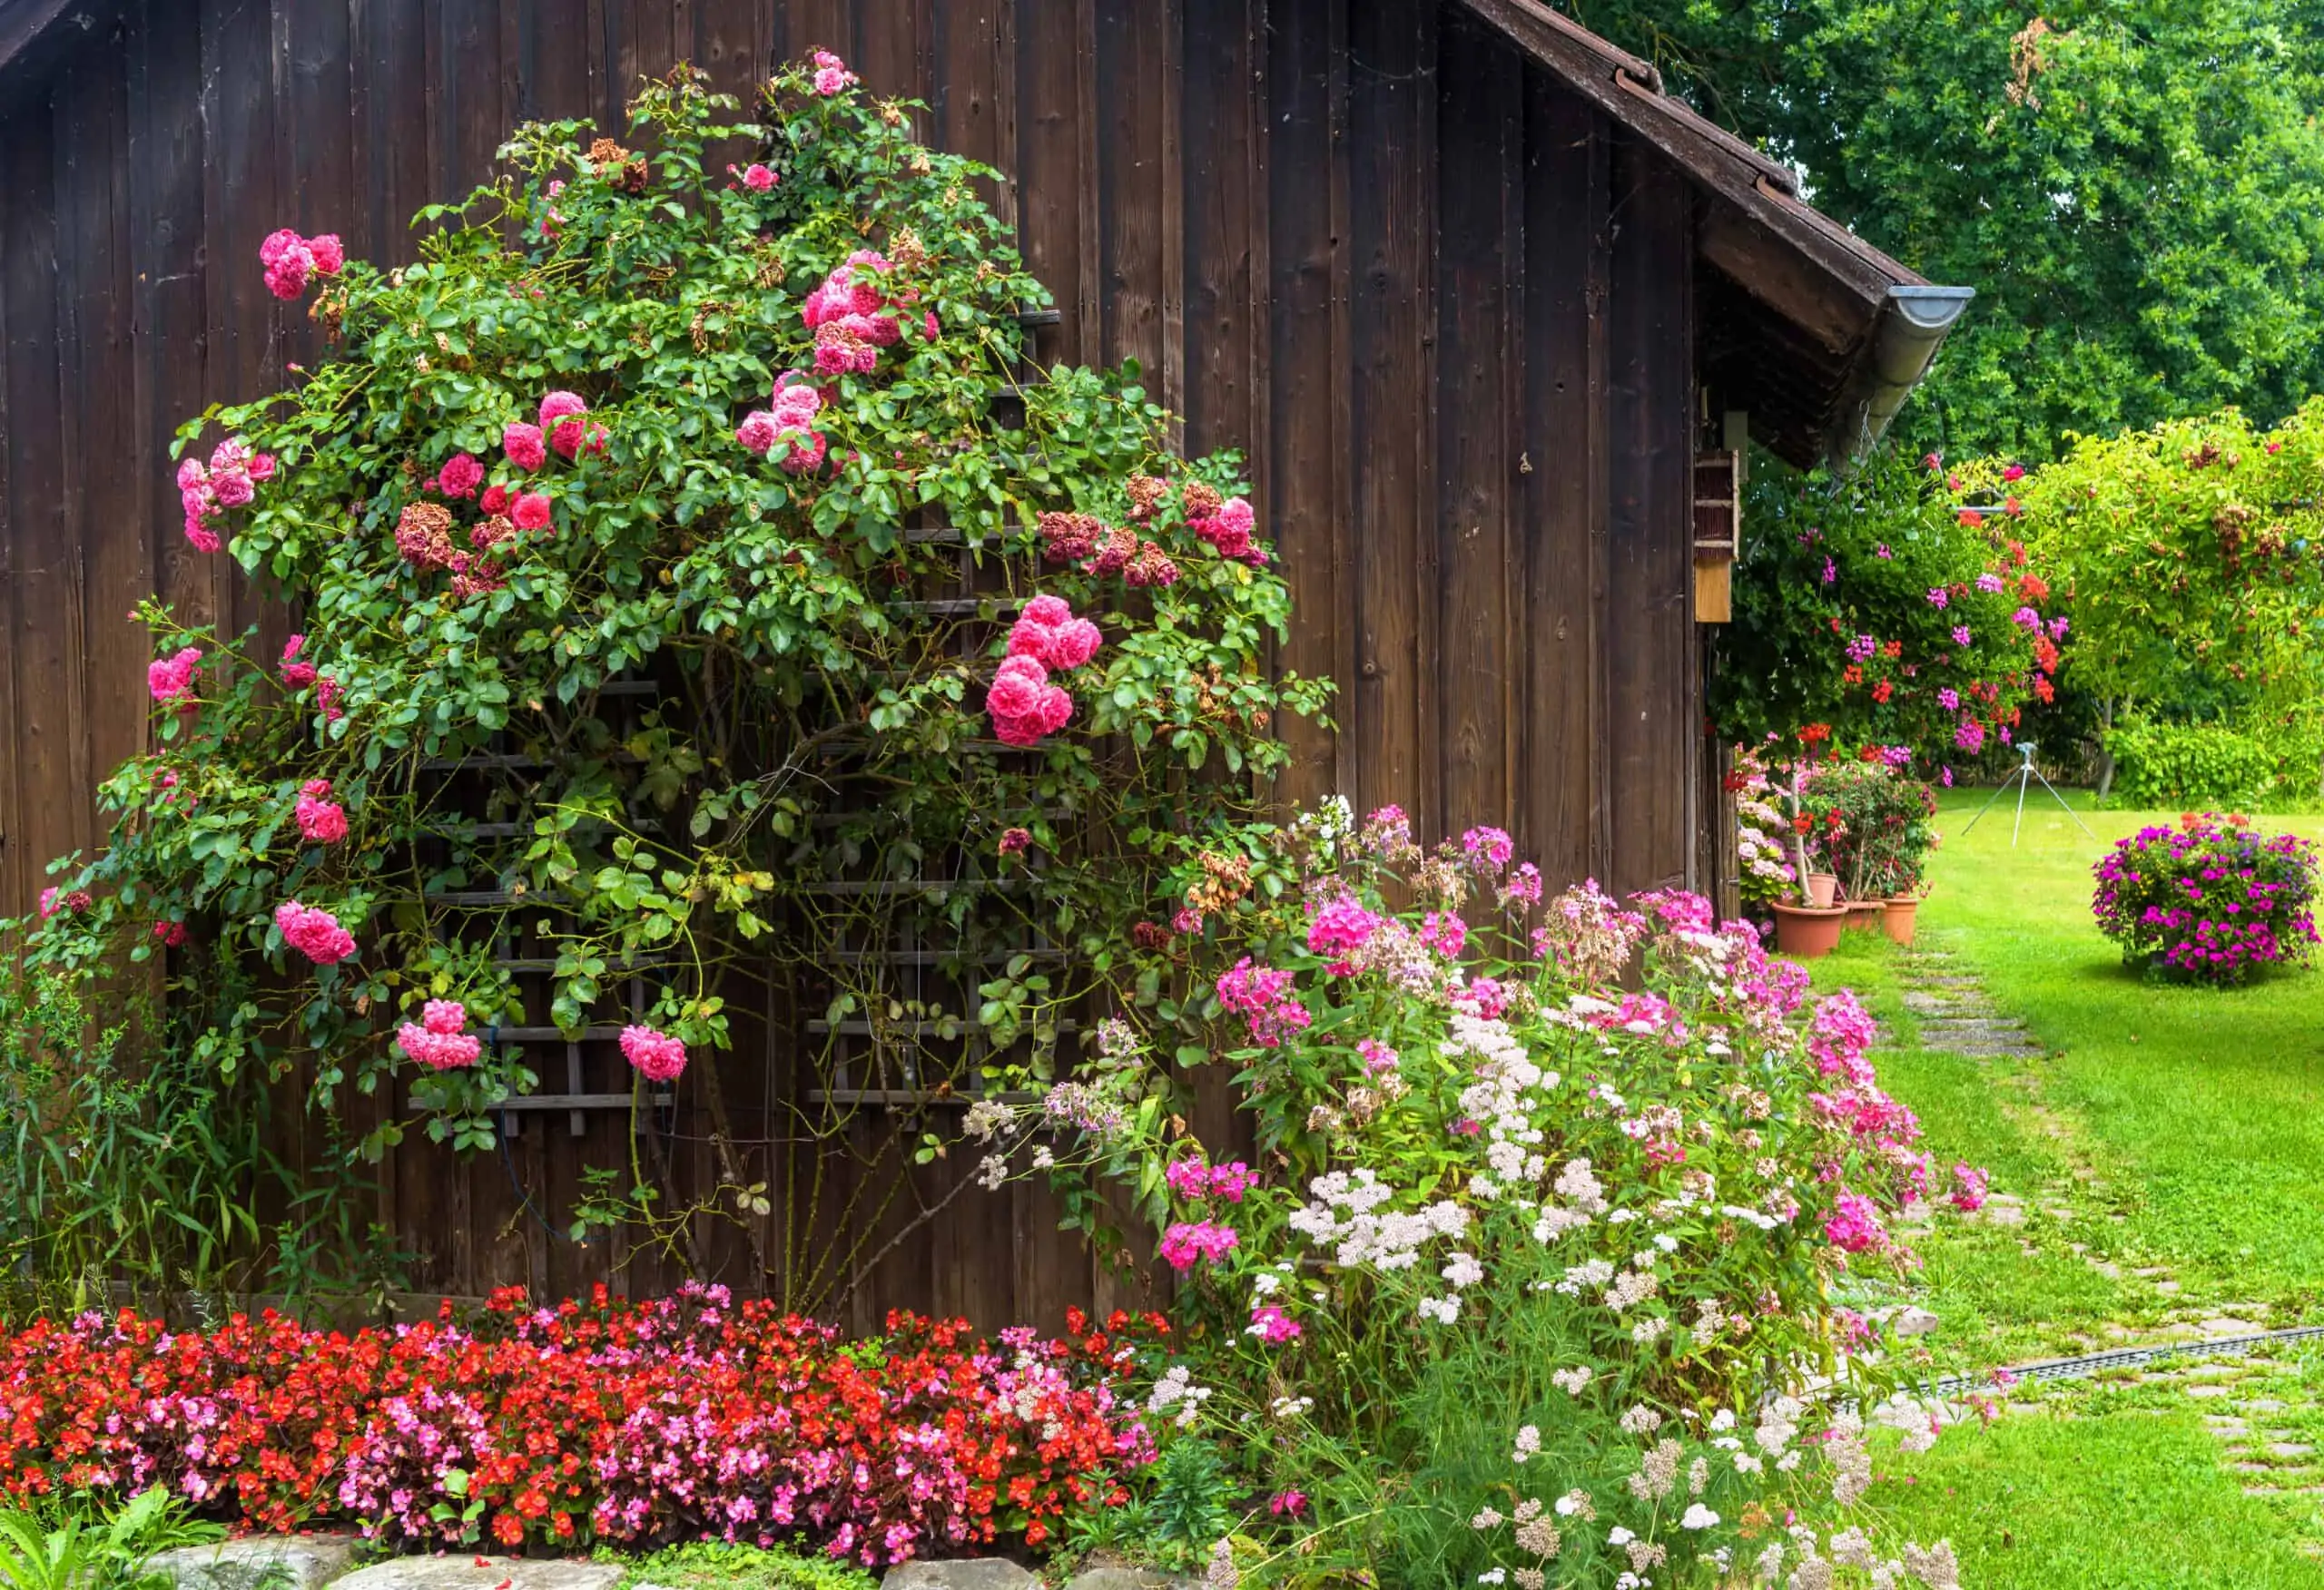 4 EASY WAYS TO FIX LANDSCAPING